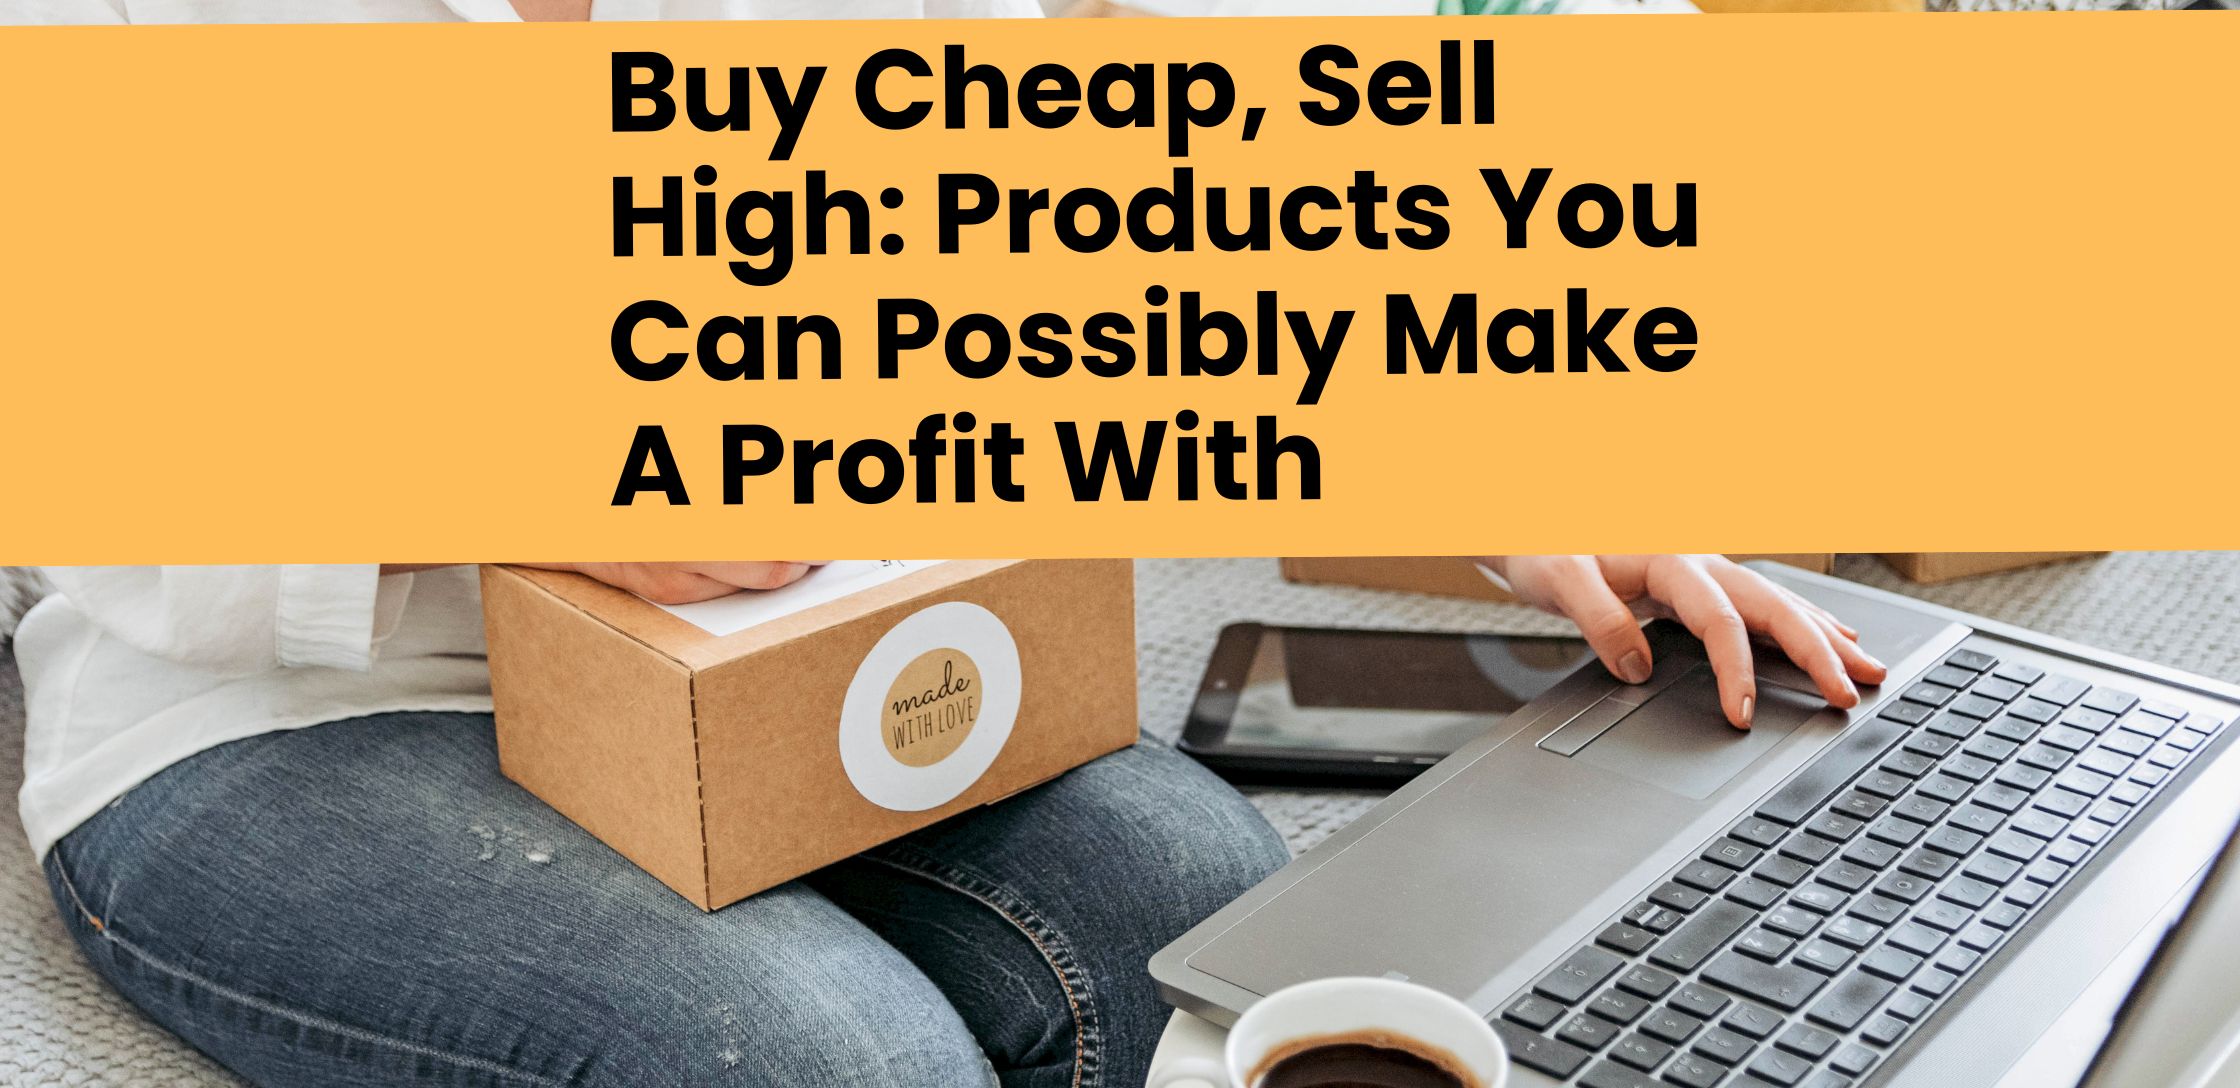 https://yofreesamples.com/wp-content/uploads/2022/06/Buy-Cheap-Sell-High-Products-You-Can-Possibly-Make-A-Profit-With.jpg